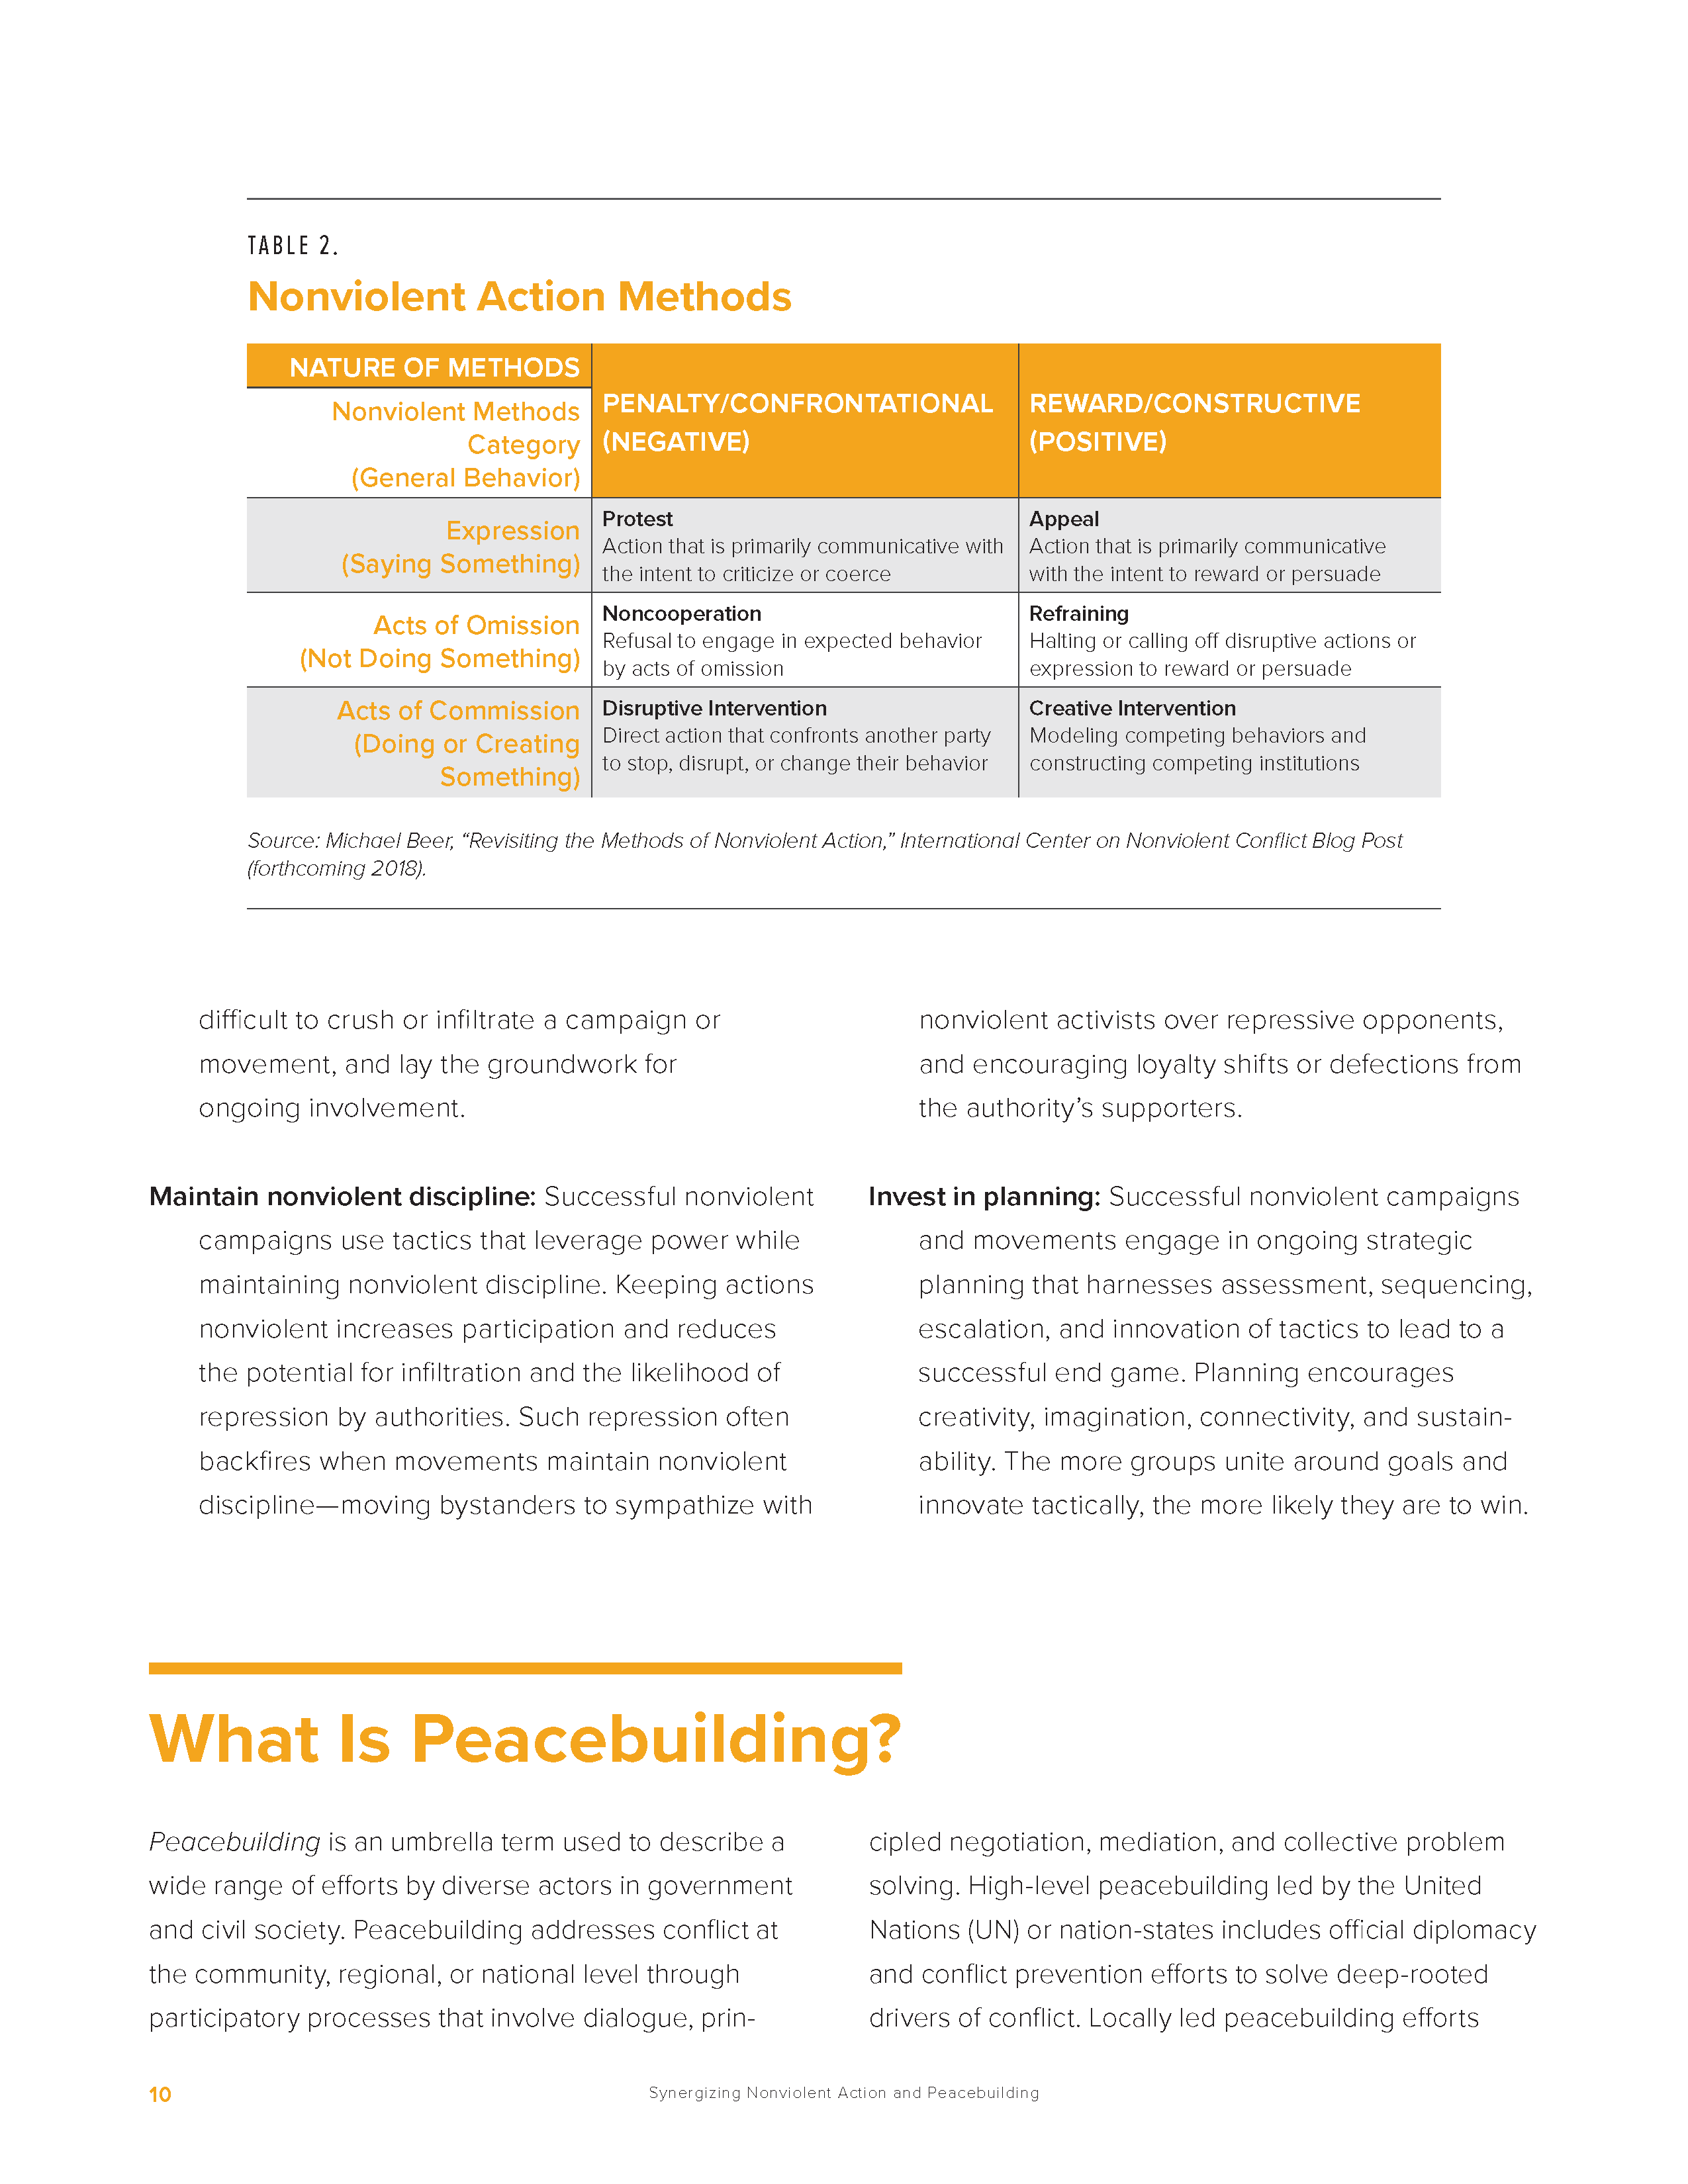 SNAP: Synergizing Nonviolent Action and Peacebuilding